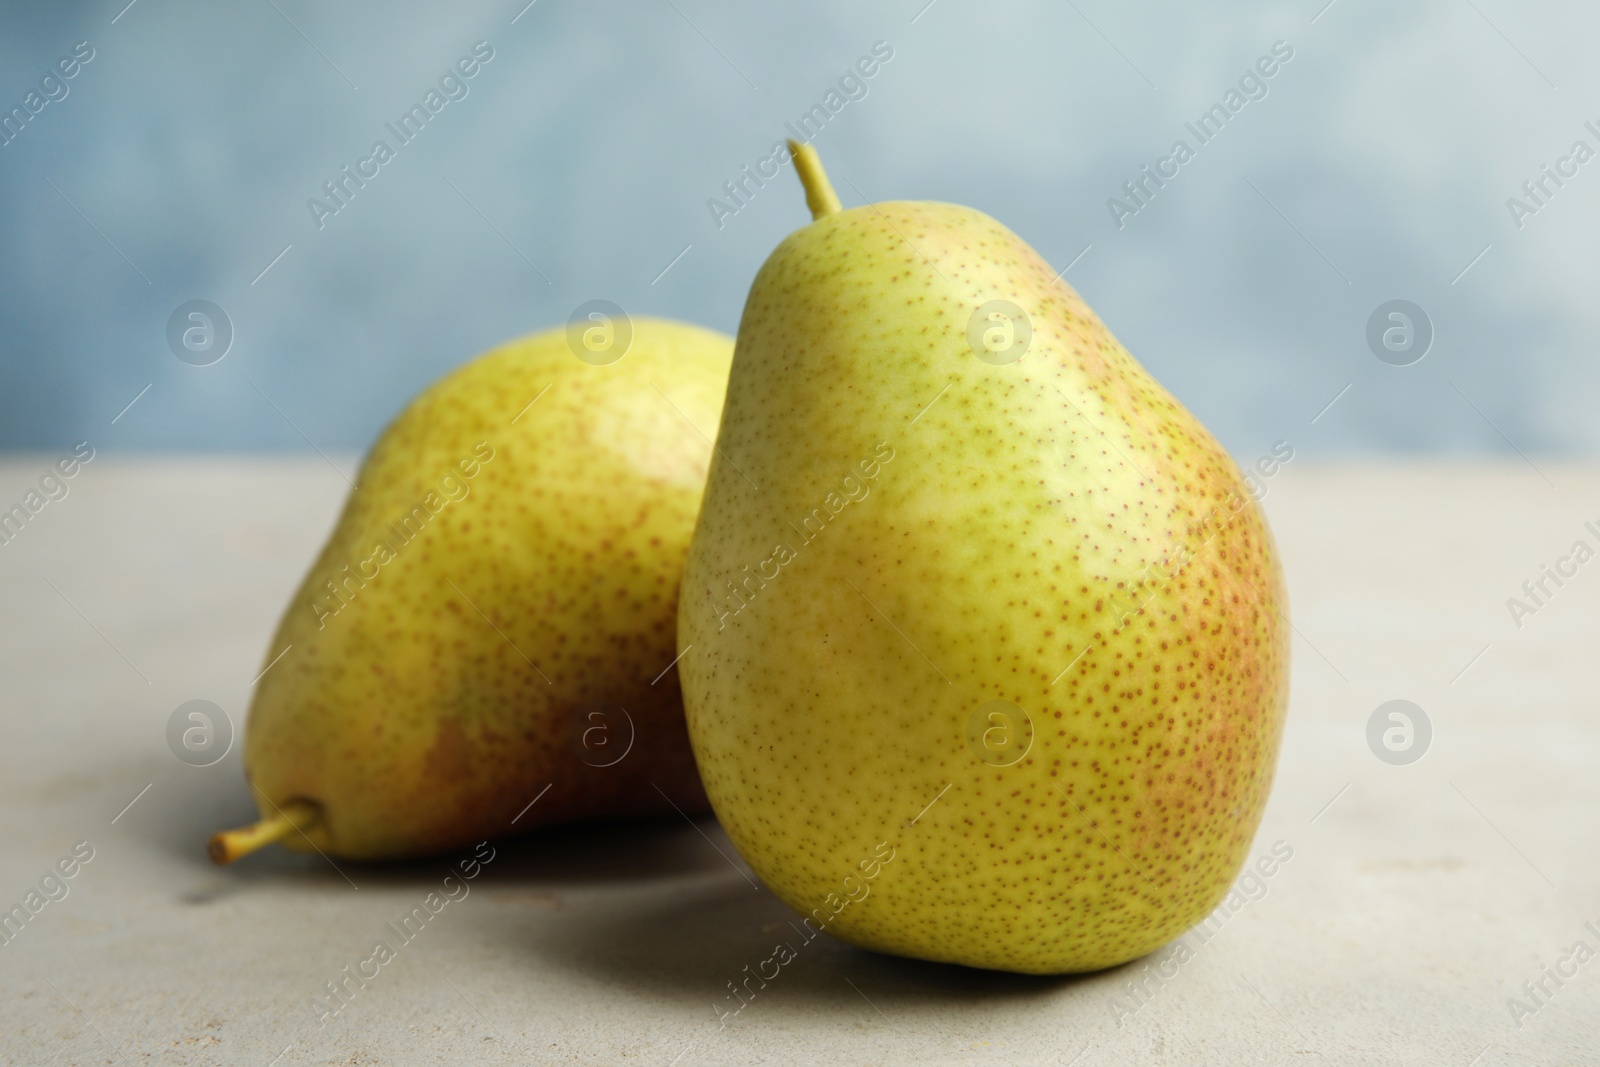 Photo of Ripe juicy pears on grey stone table against blue background, closeup